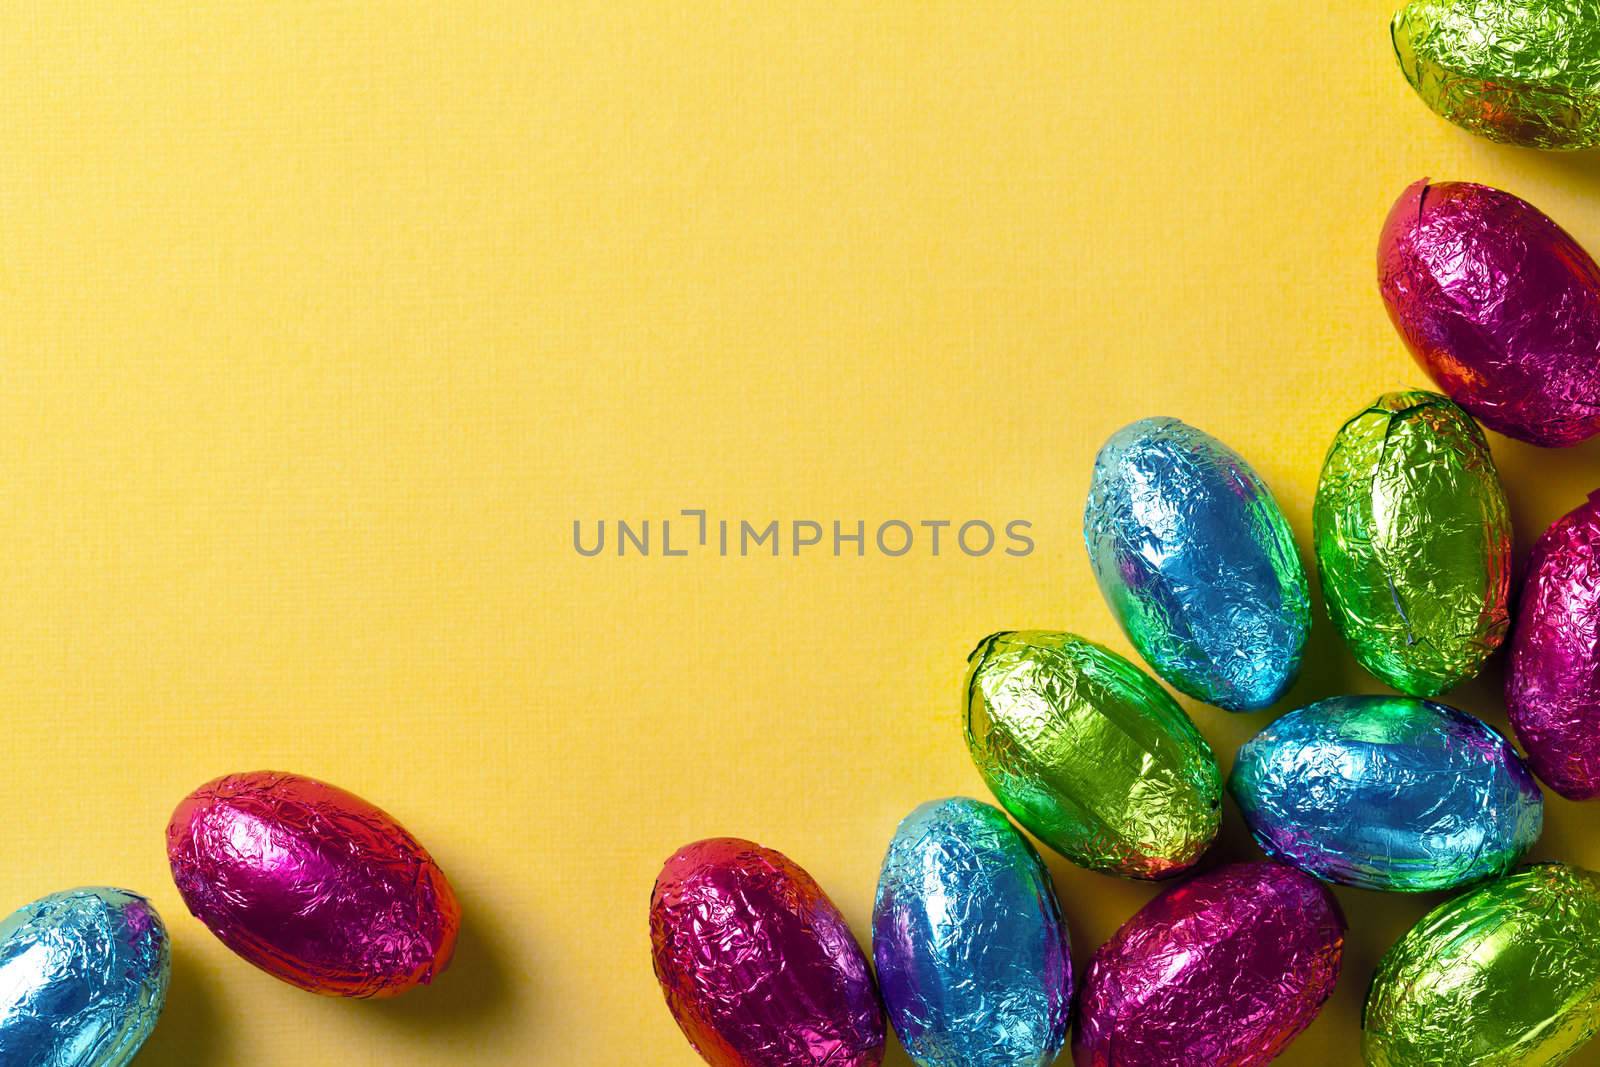 Chocolate easter eggs on yellow paper background. Top view, macro shot